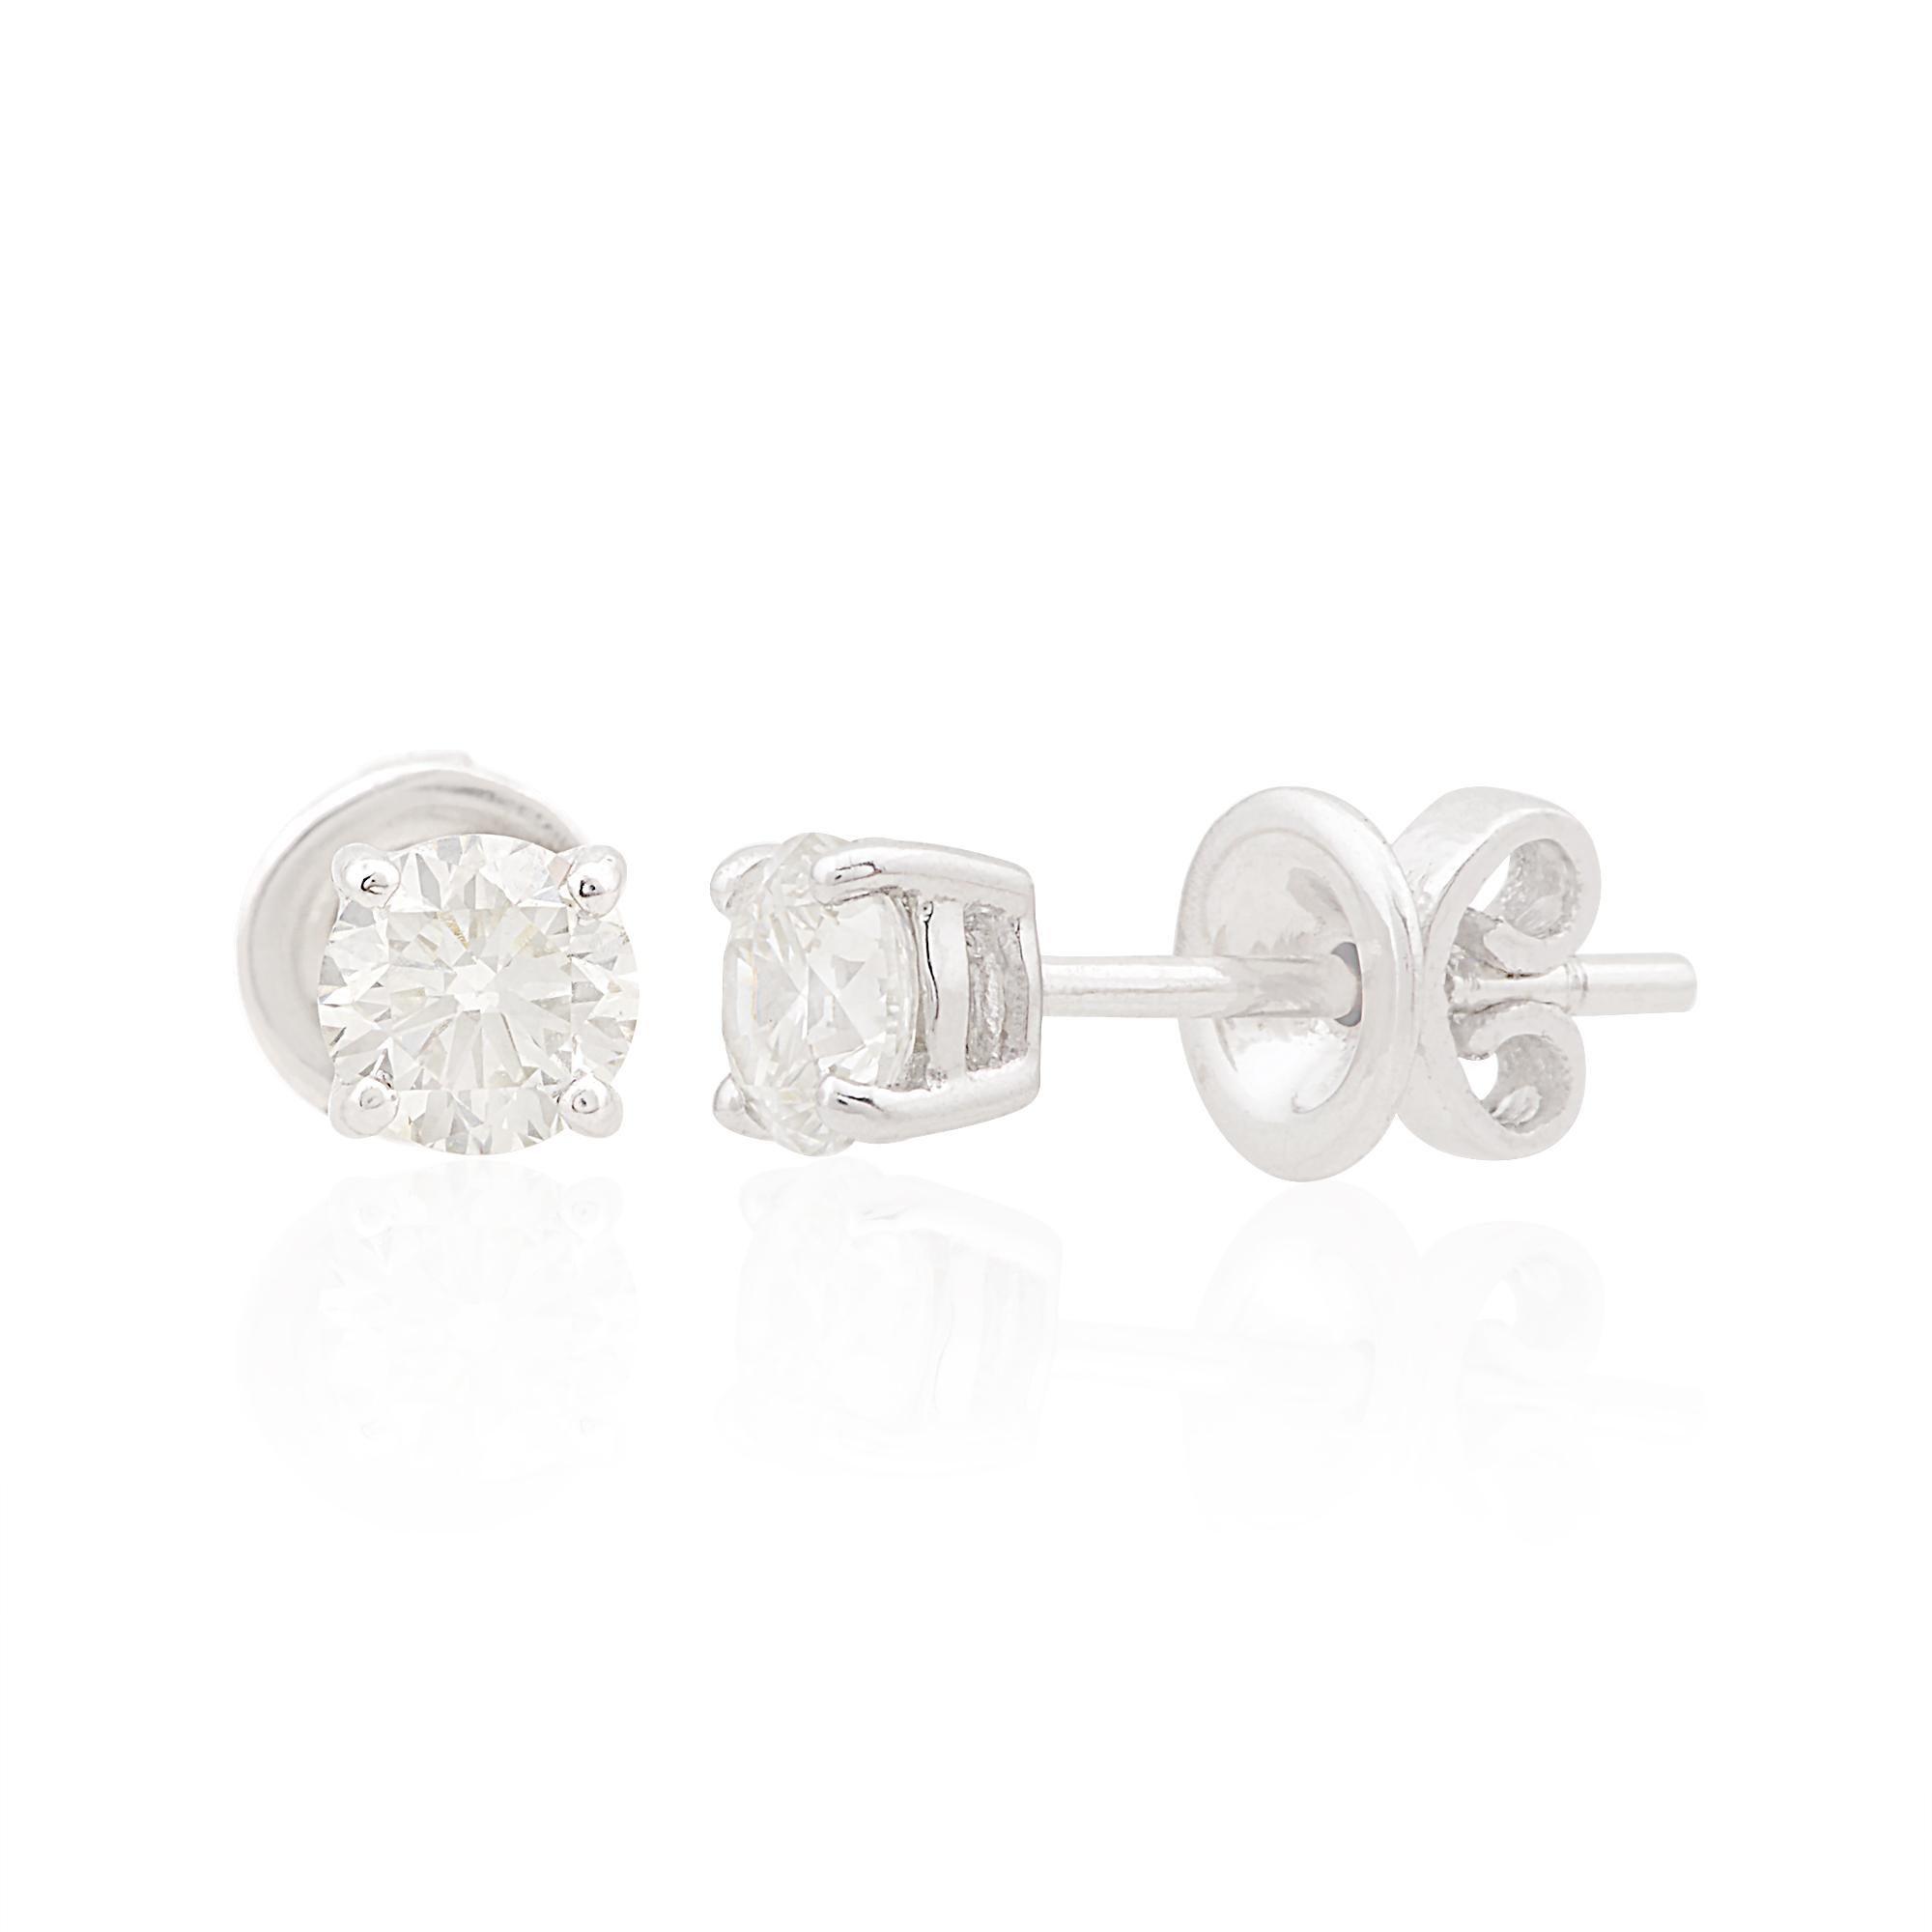 Round Cut SI Clarity HI Color Solitaire Round Diamond Stud Earrings 10 Karat White Gold For Sale